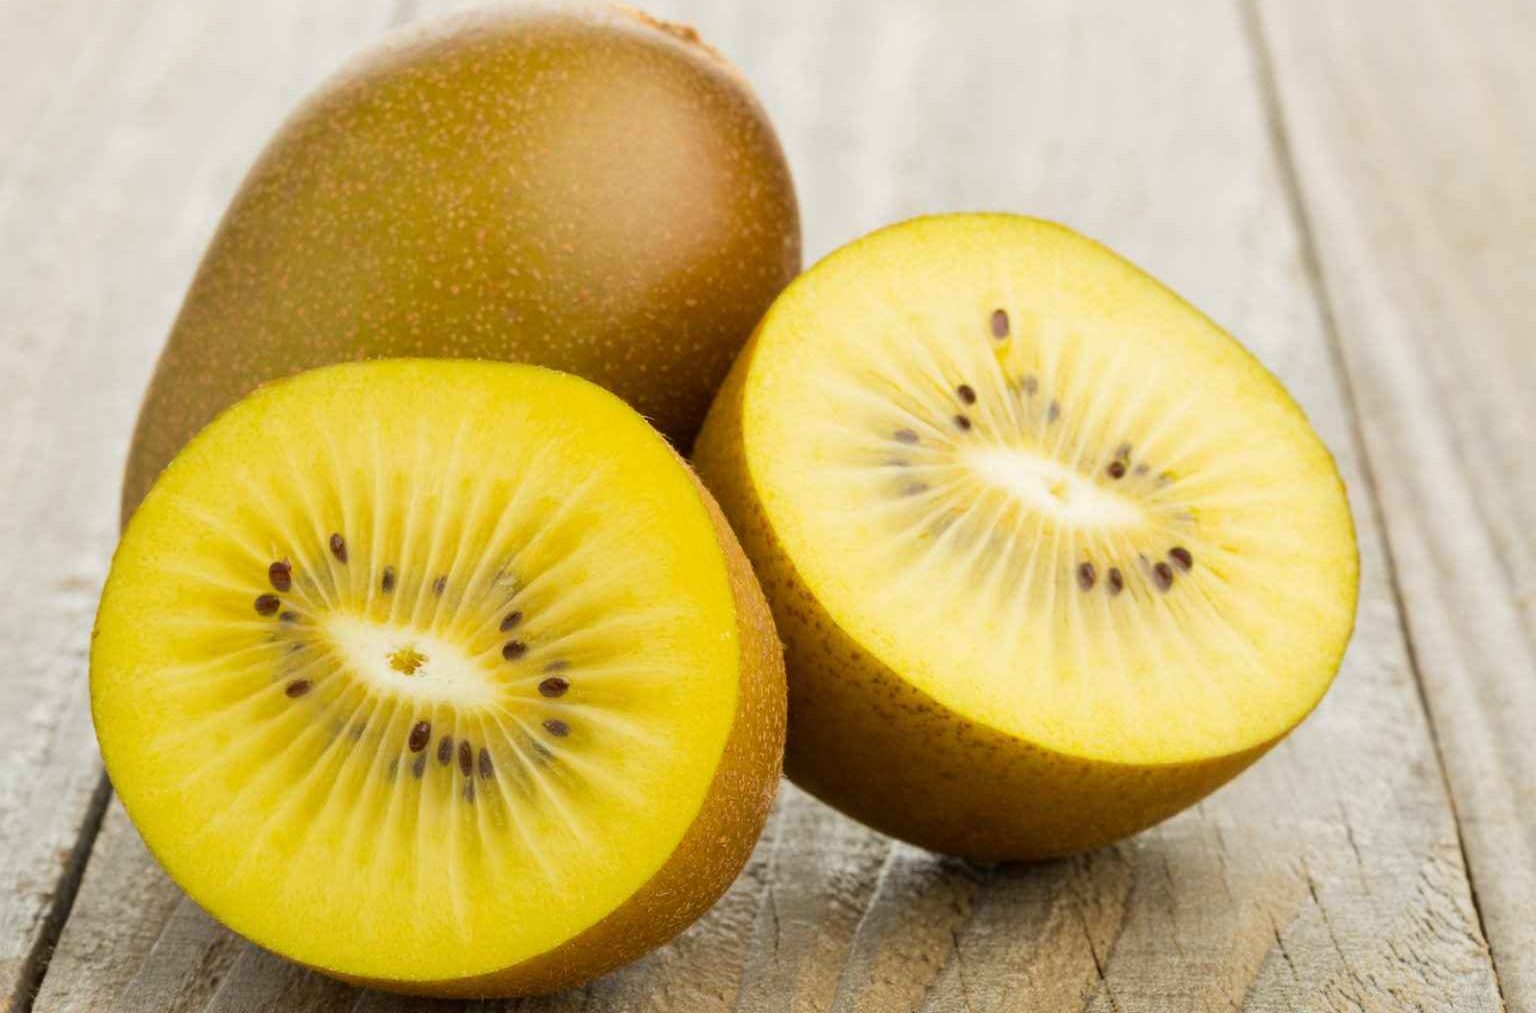  The purchase price of gold kiwifruit + advantages and disadvantages 